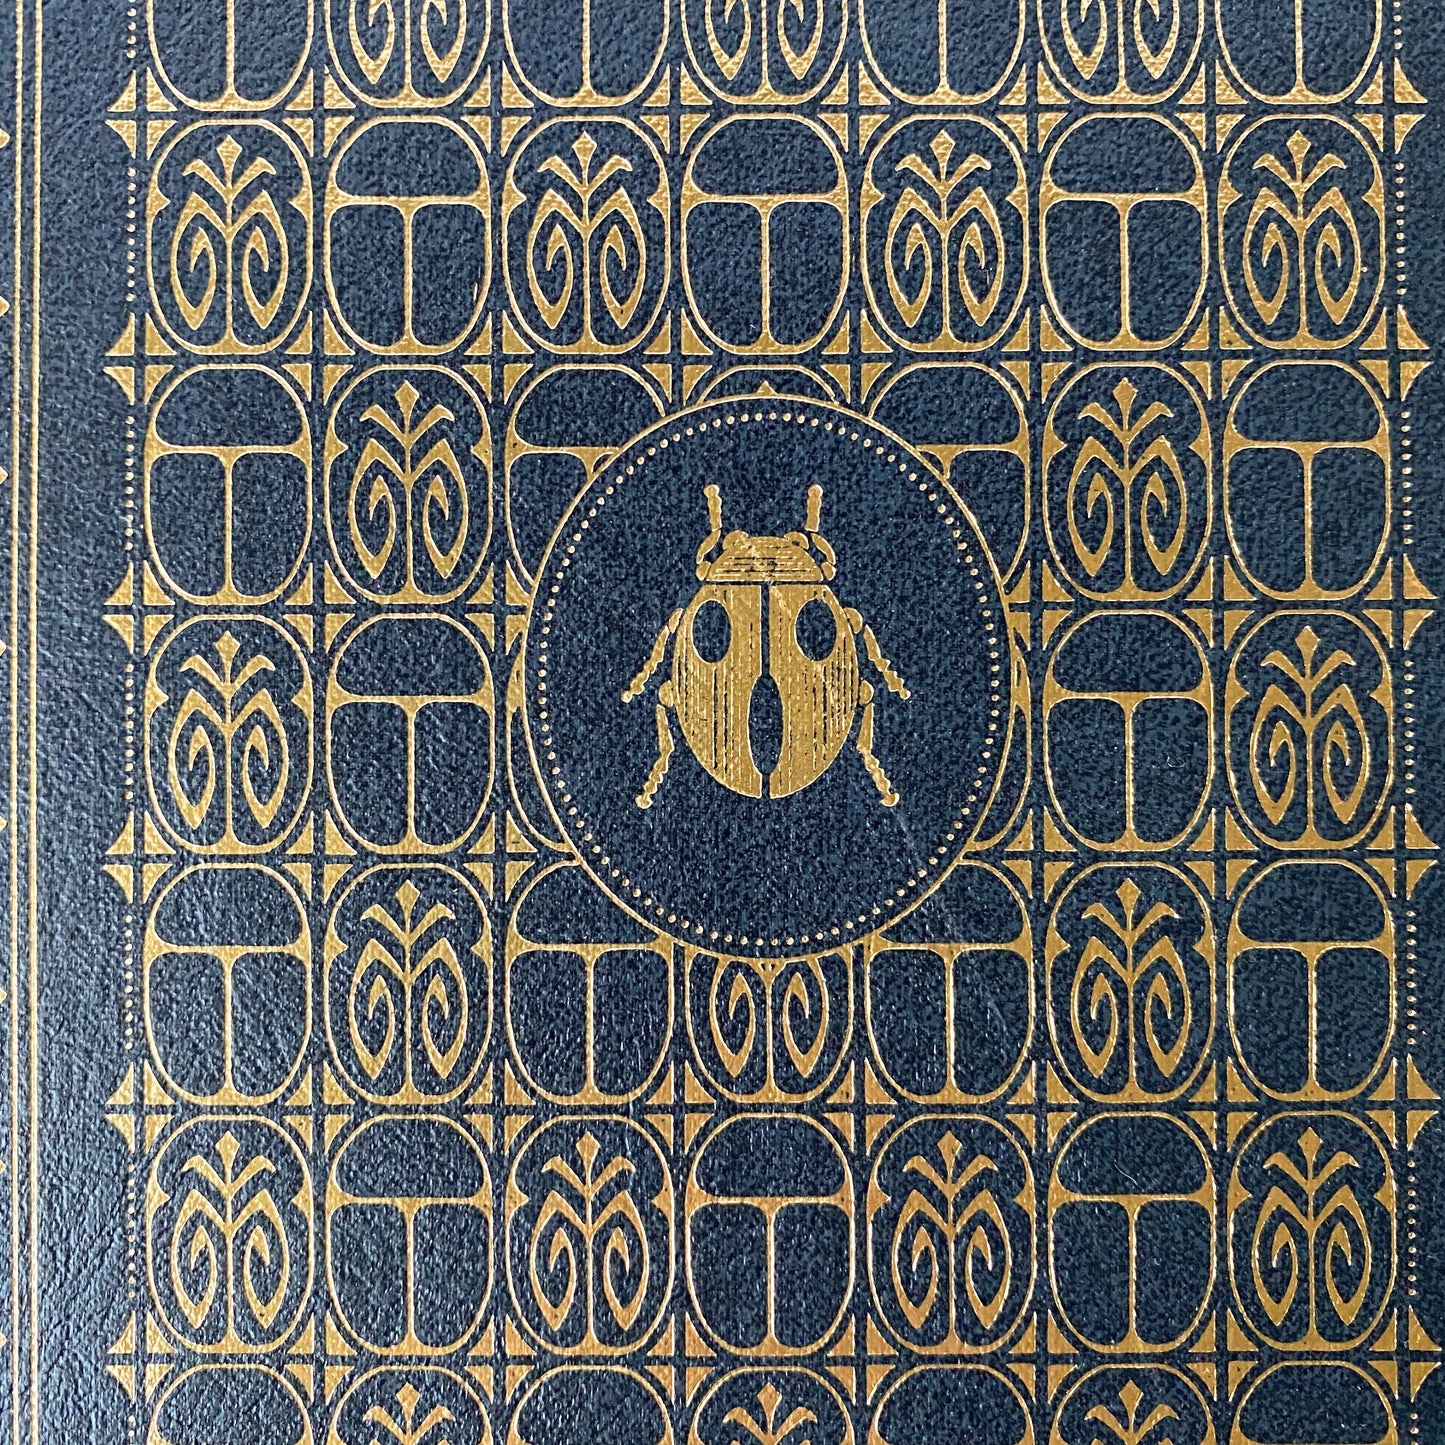 Vintage Edgar Allan Poe Tales of Mystery and Imagination, The Franklin Library of Mystery Masterpieces